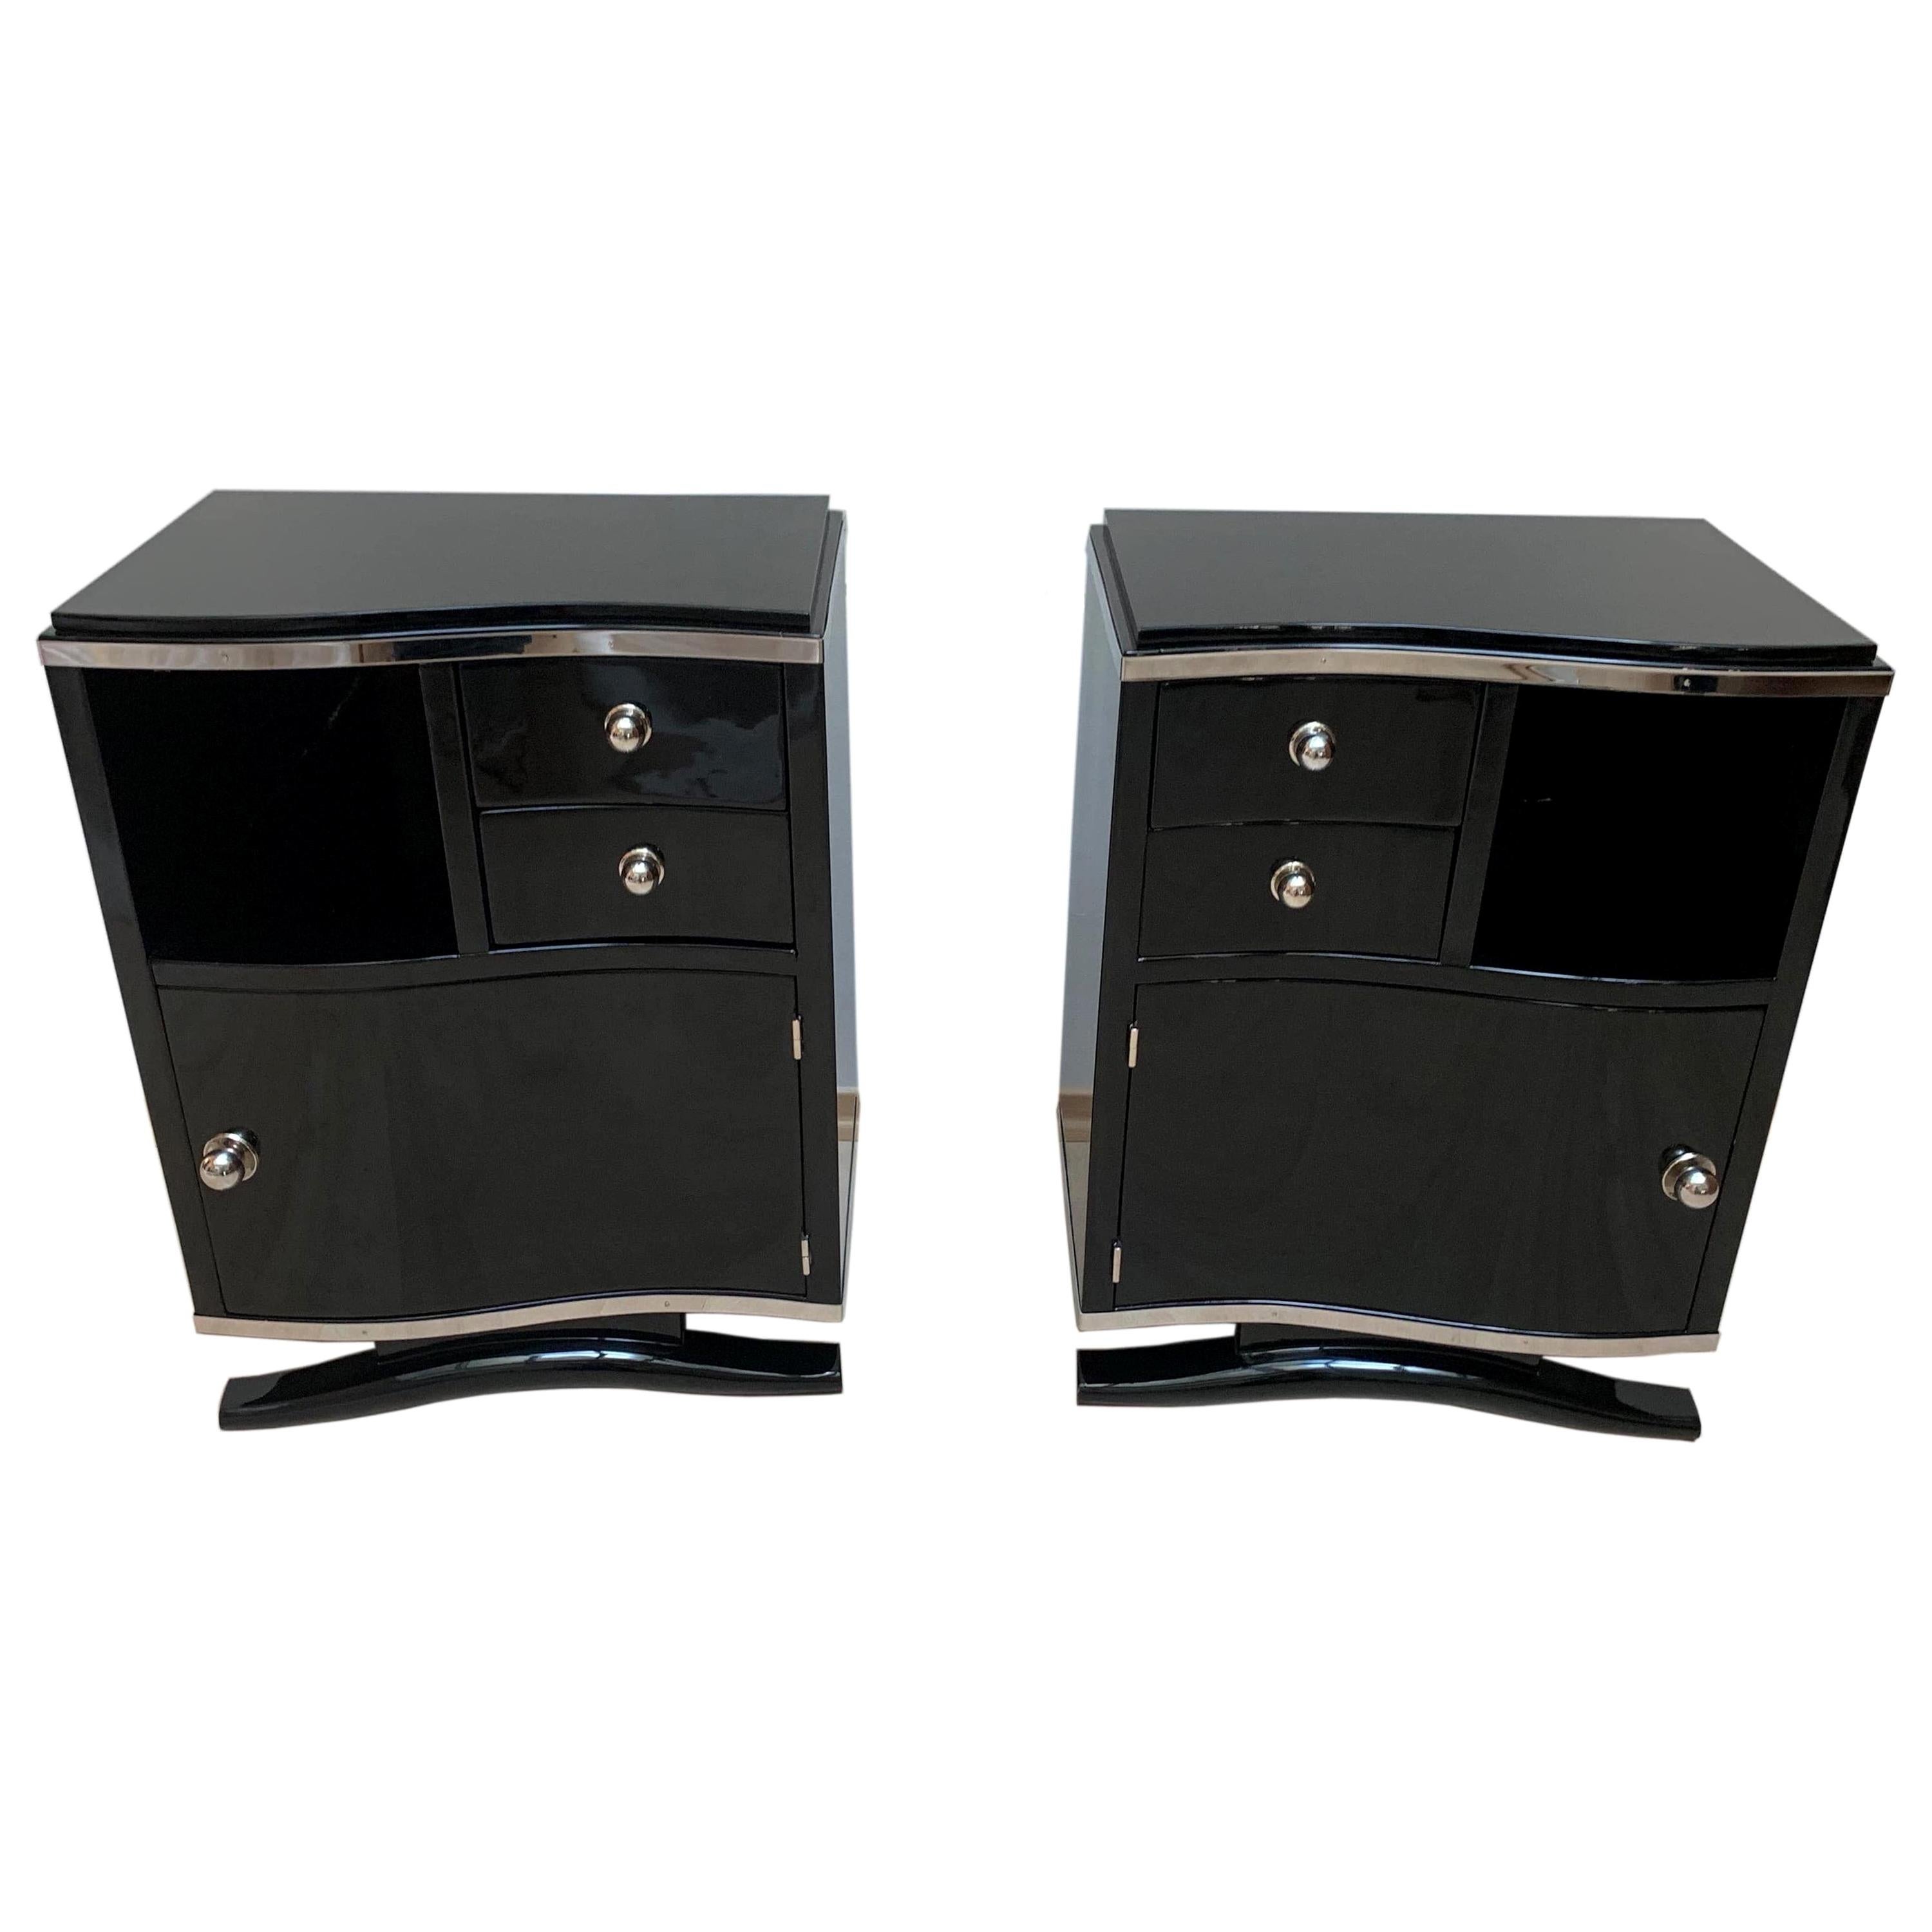 Pair of Art Deco Nightstands, Black Lacquer and Chrome, France, circa 1930